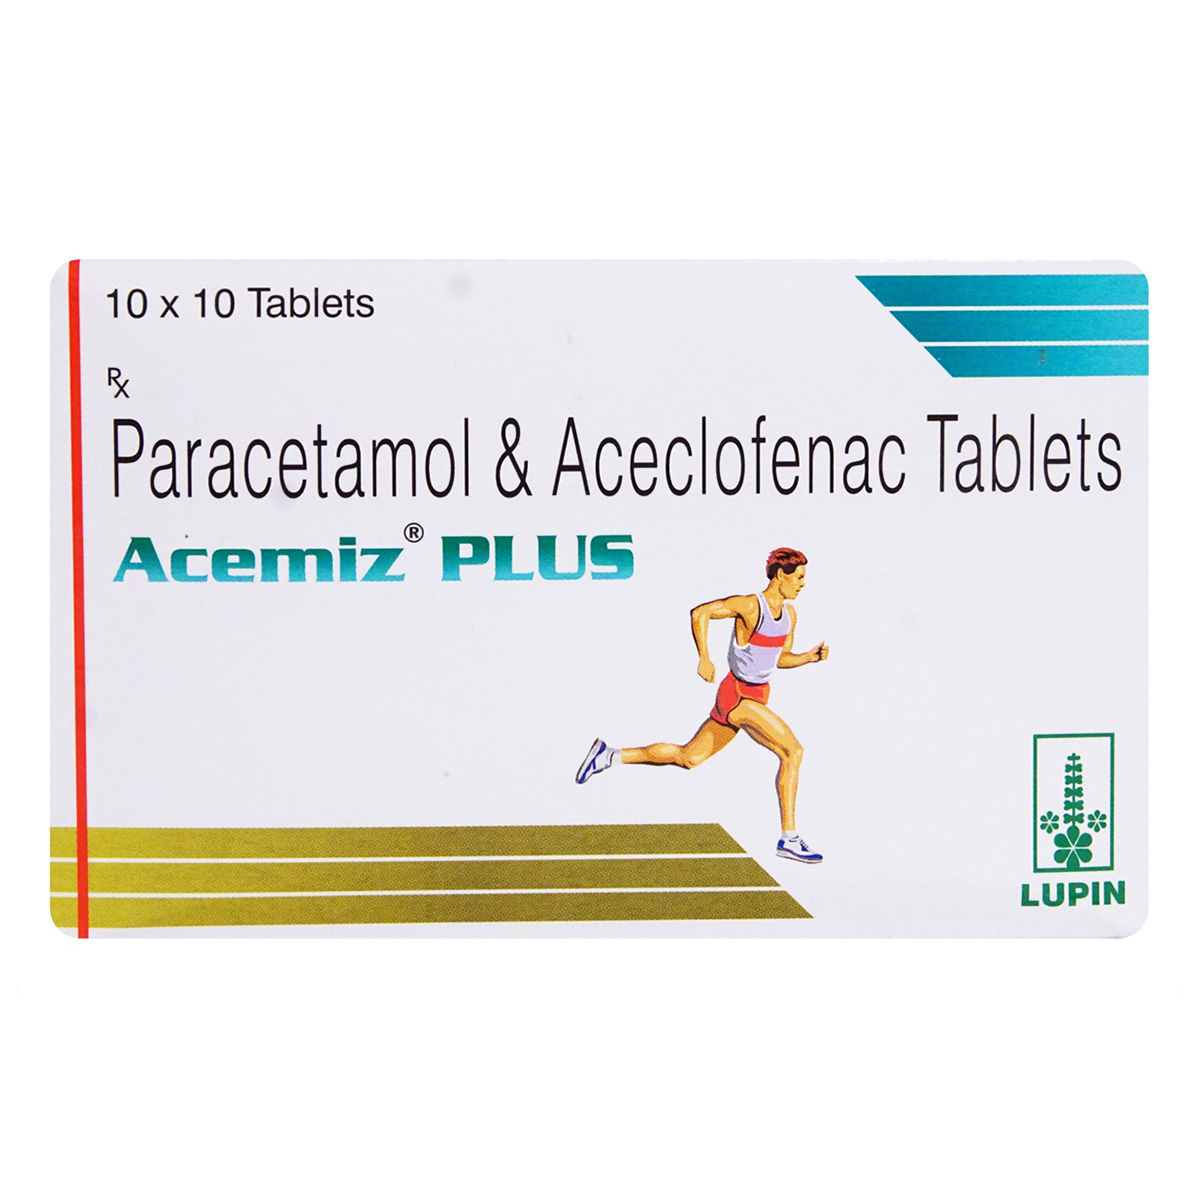 Acemiz Plus Tablet, Uses, Side Effects, Price